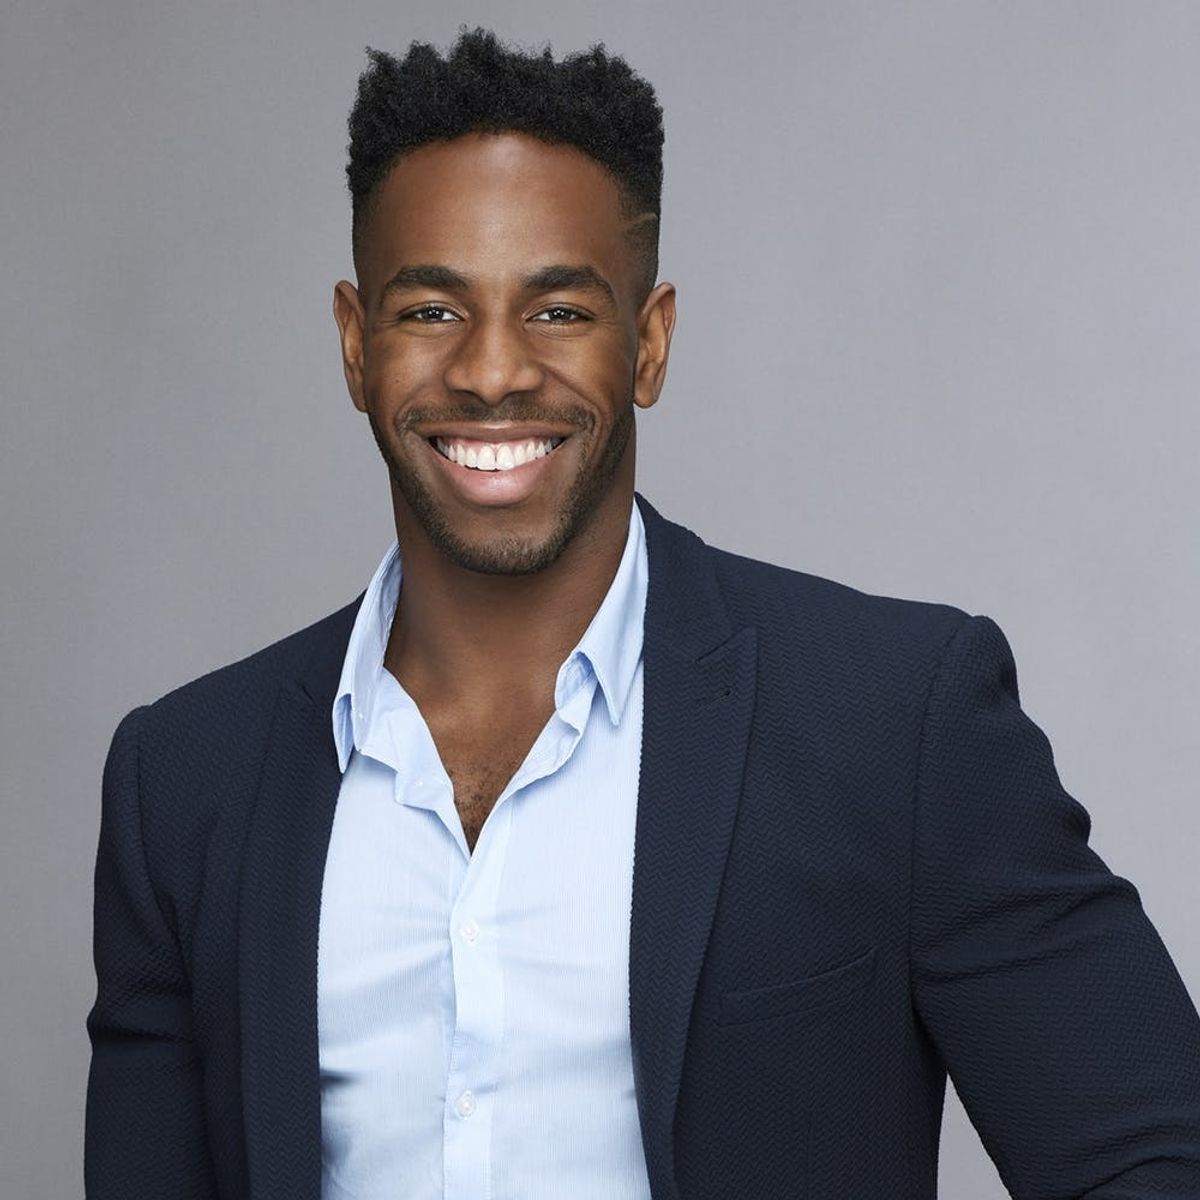 ‘Bachelorette’ Contestant Lincoln Adim Convicted of Indecent Assault and Battery